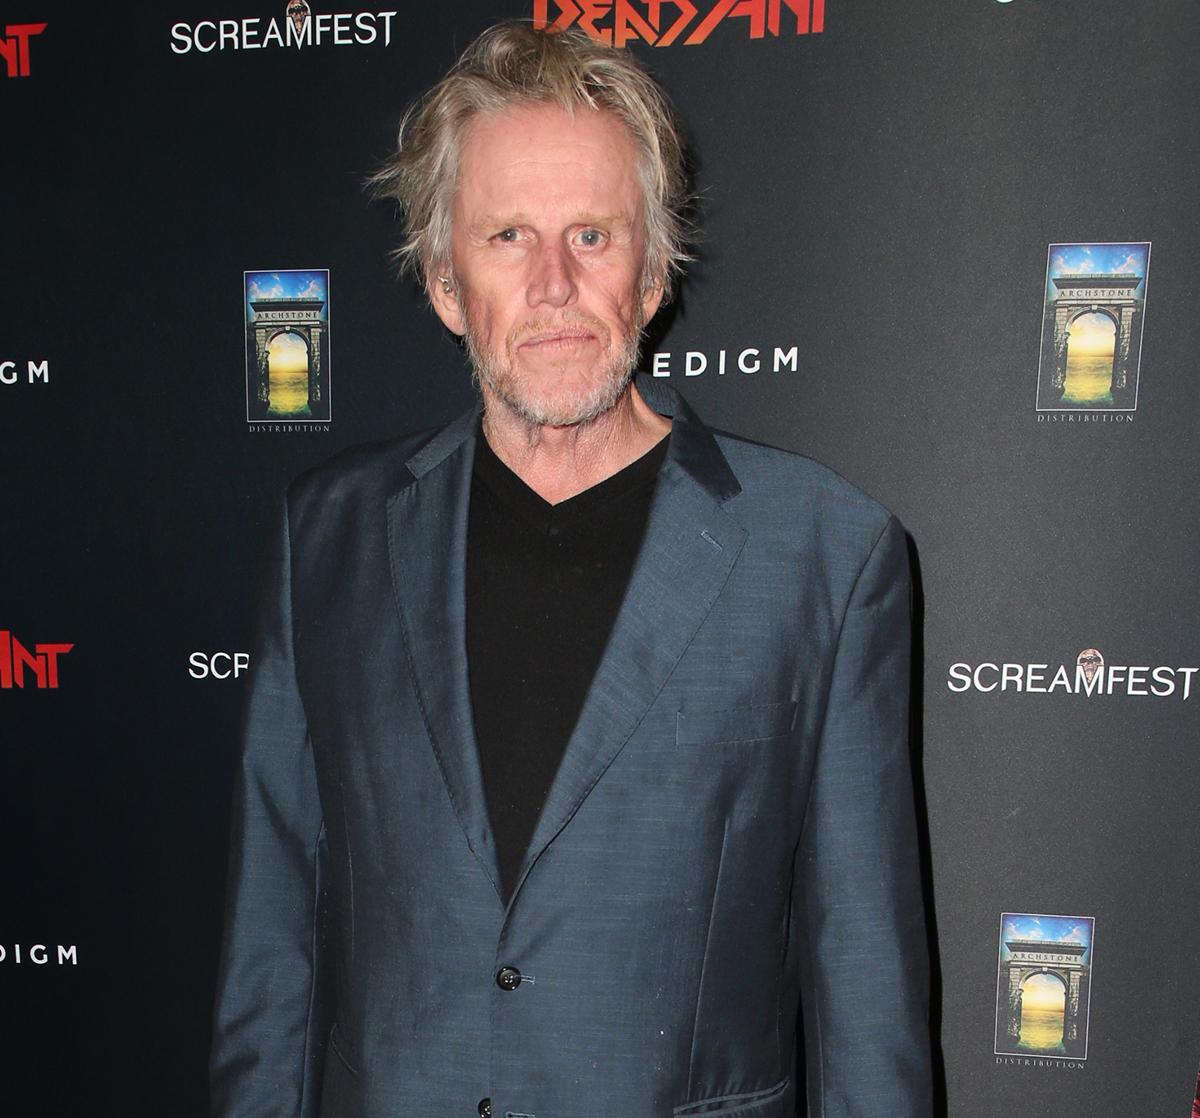 #Gary Busey Arrested On Criminal Sexual Contact Charges After Fan Convention In New Jersey